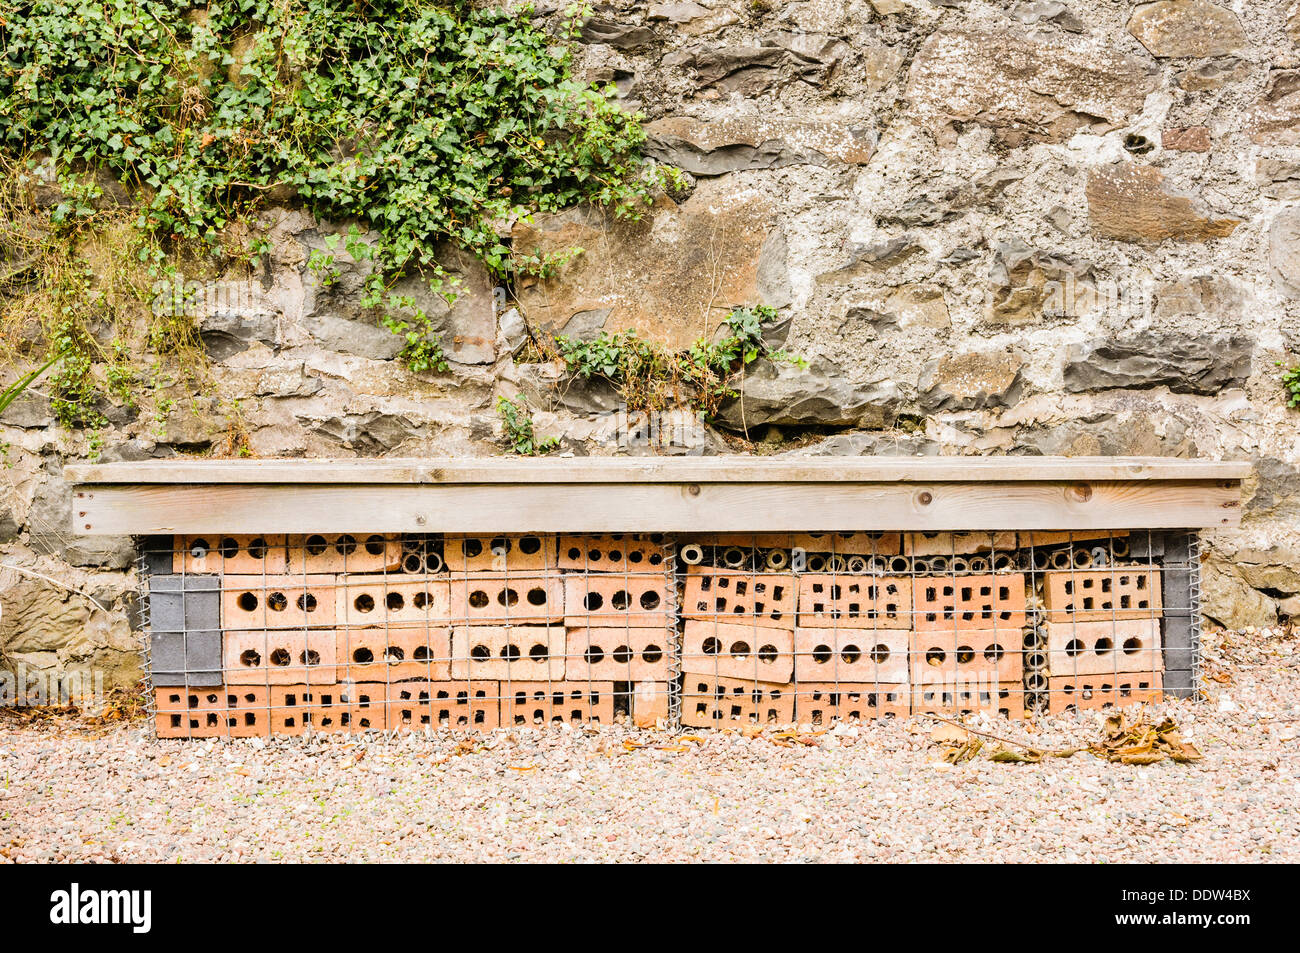 A wildlife-friendly garden bench with lots of holes for insects Stock Photo